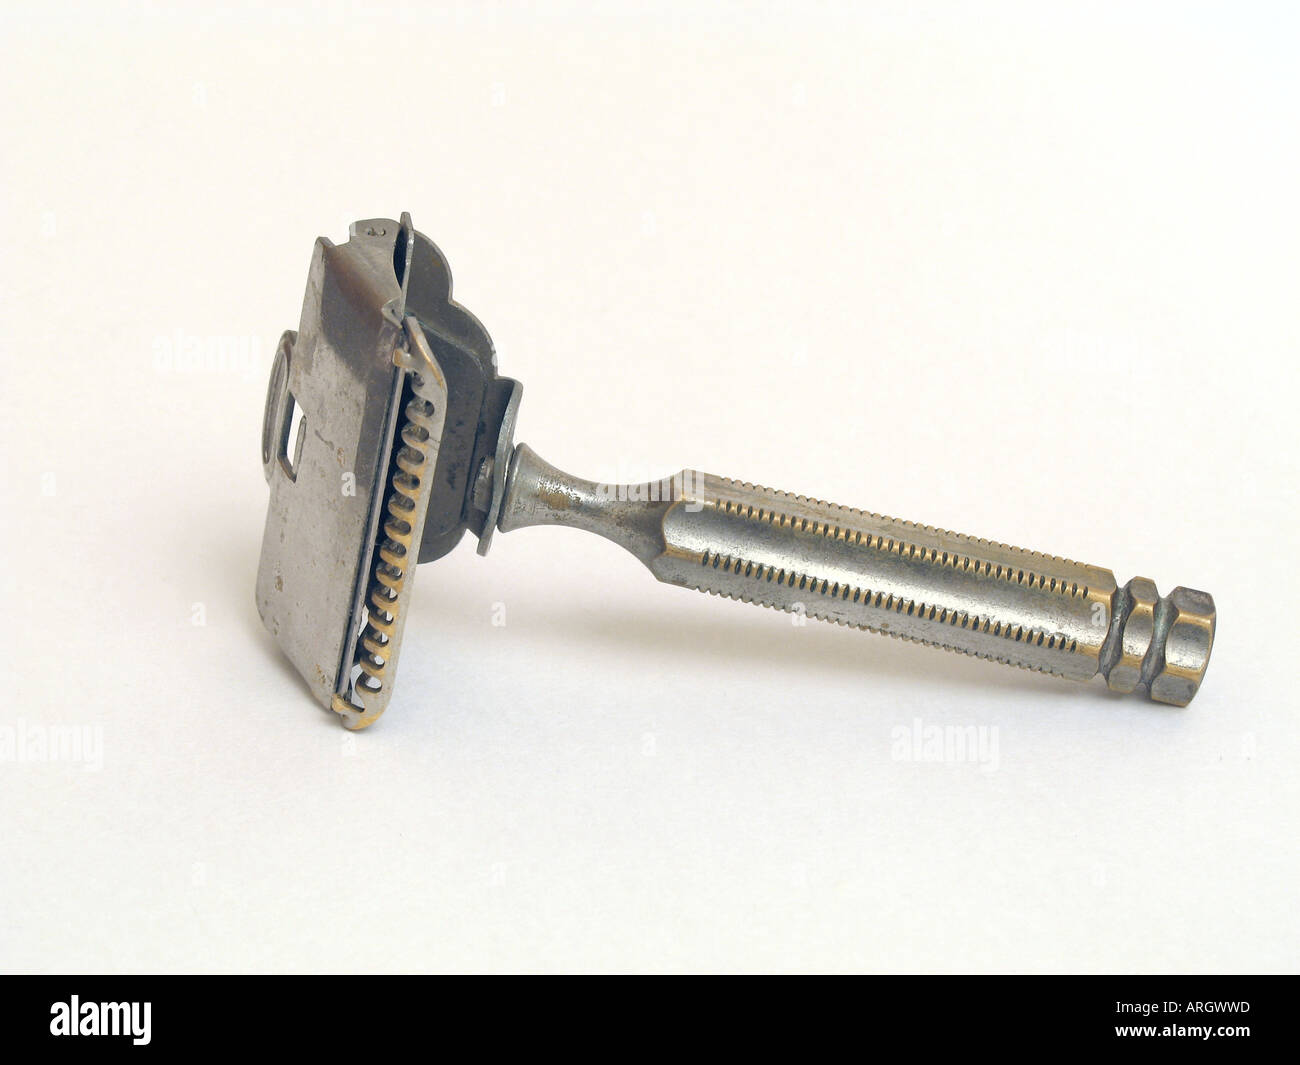 Safety Razor High Resolution Stock Photography and Images - Alamy